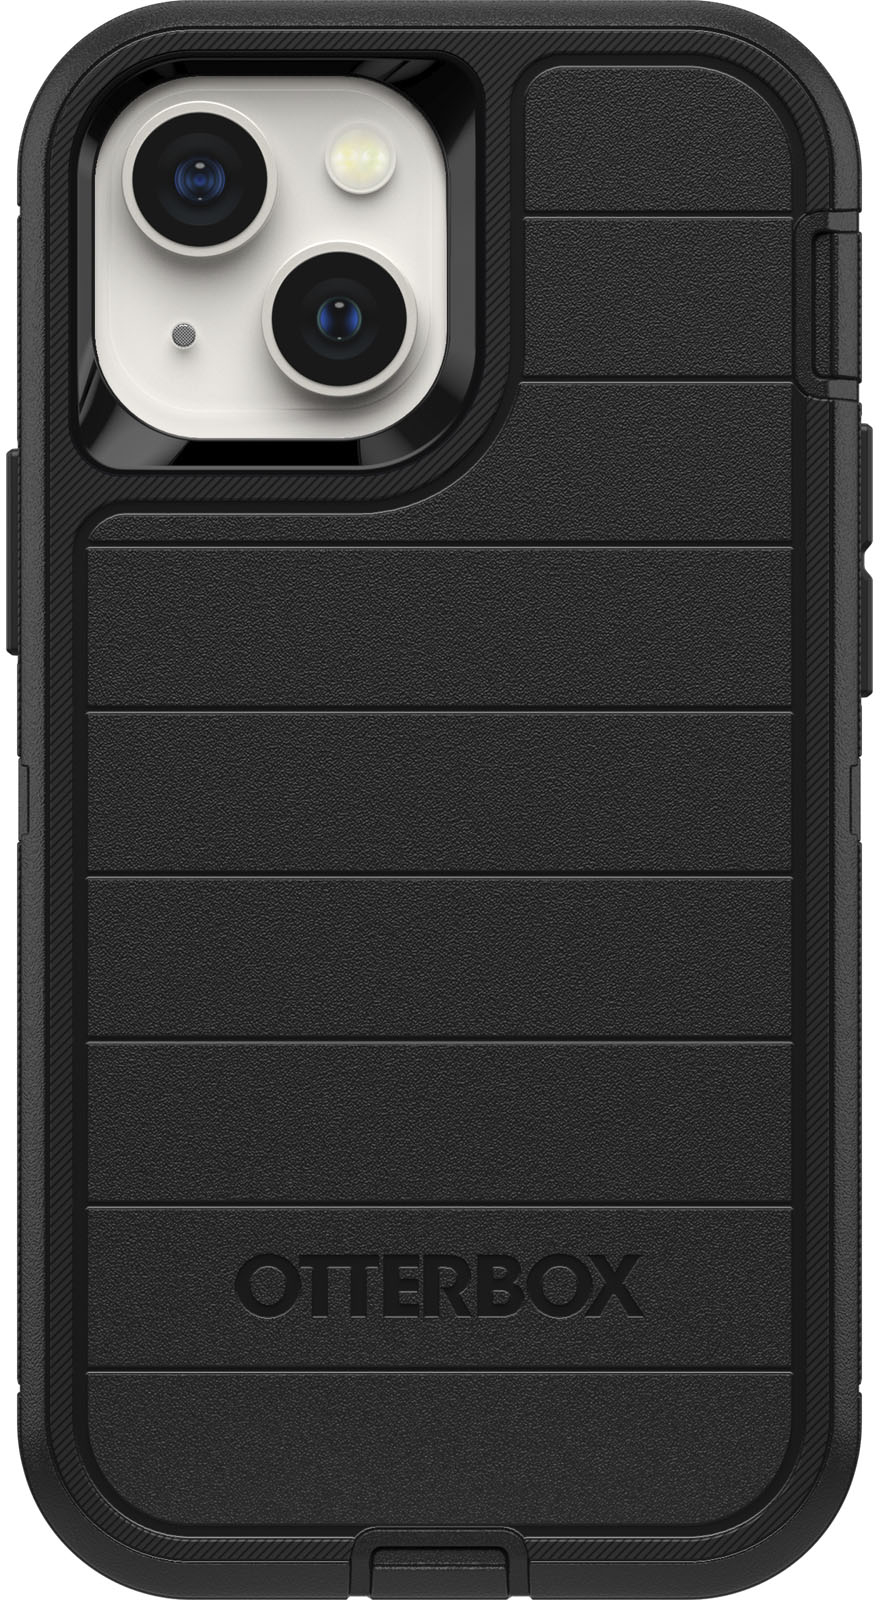 Questions and Answers: OtterBox Defender Series Pro Hard Shell for ...